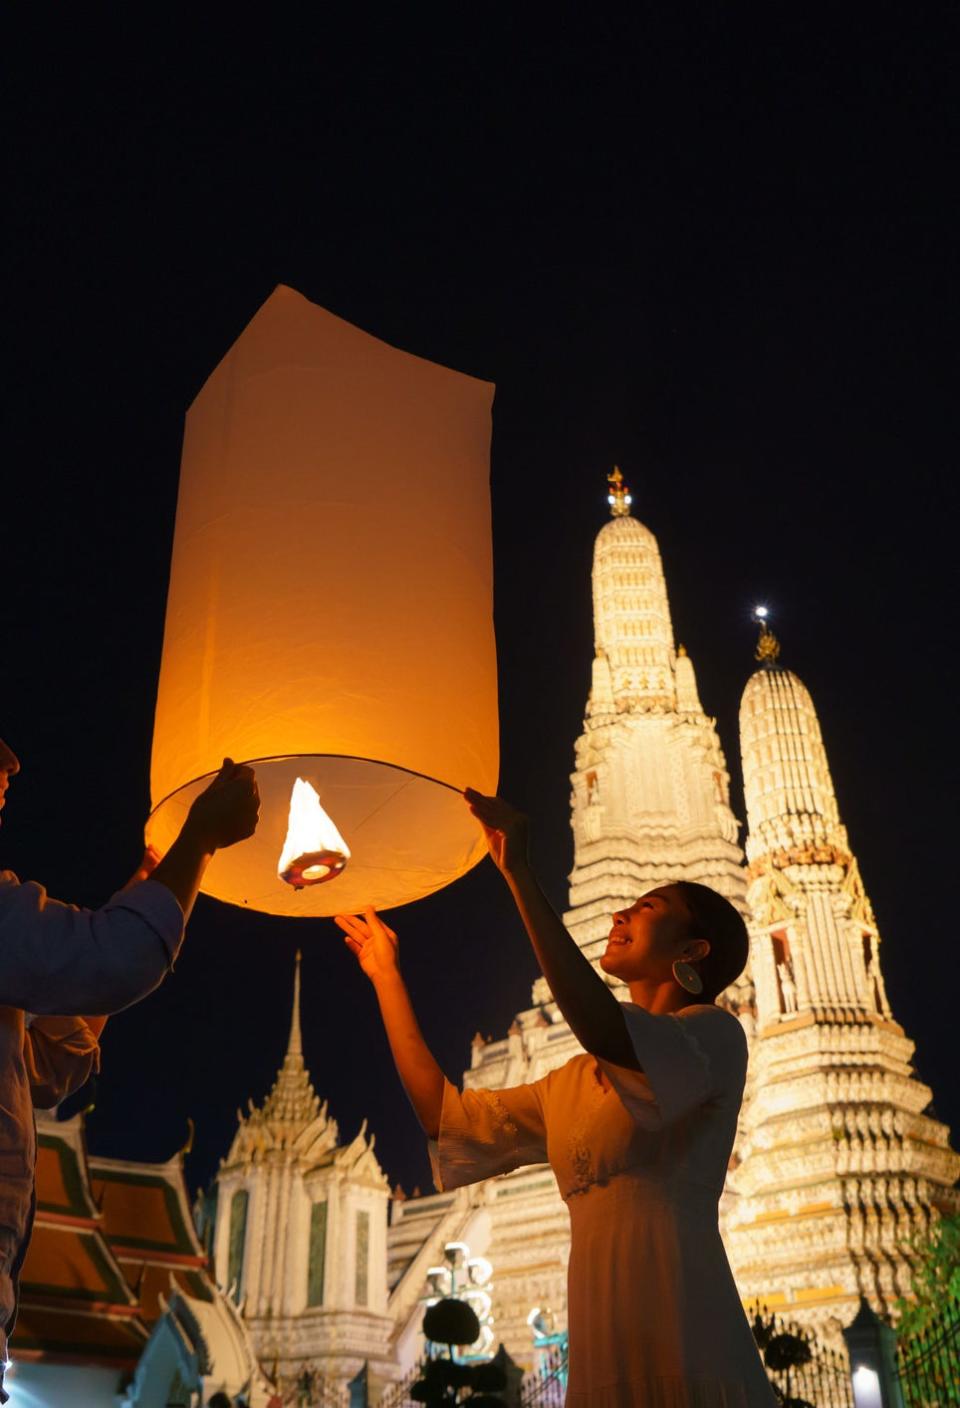 Lighting a floating lantern in Thailand